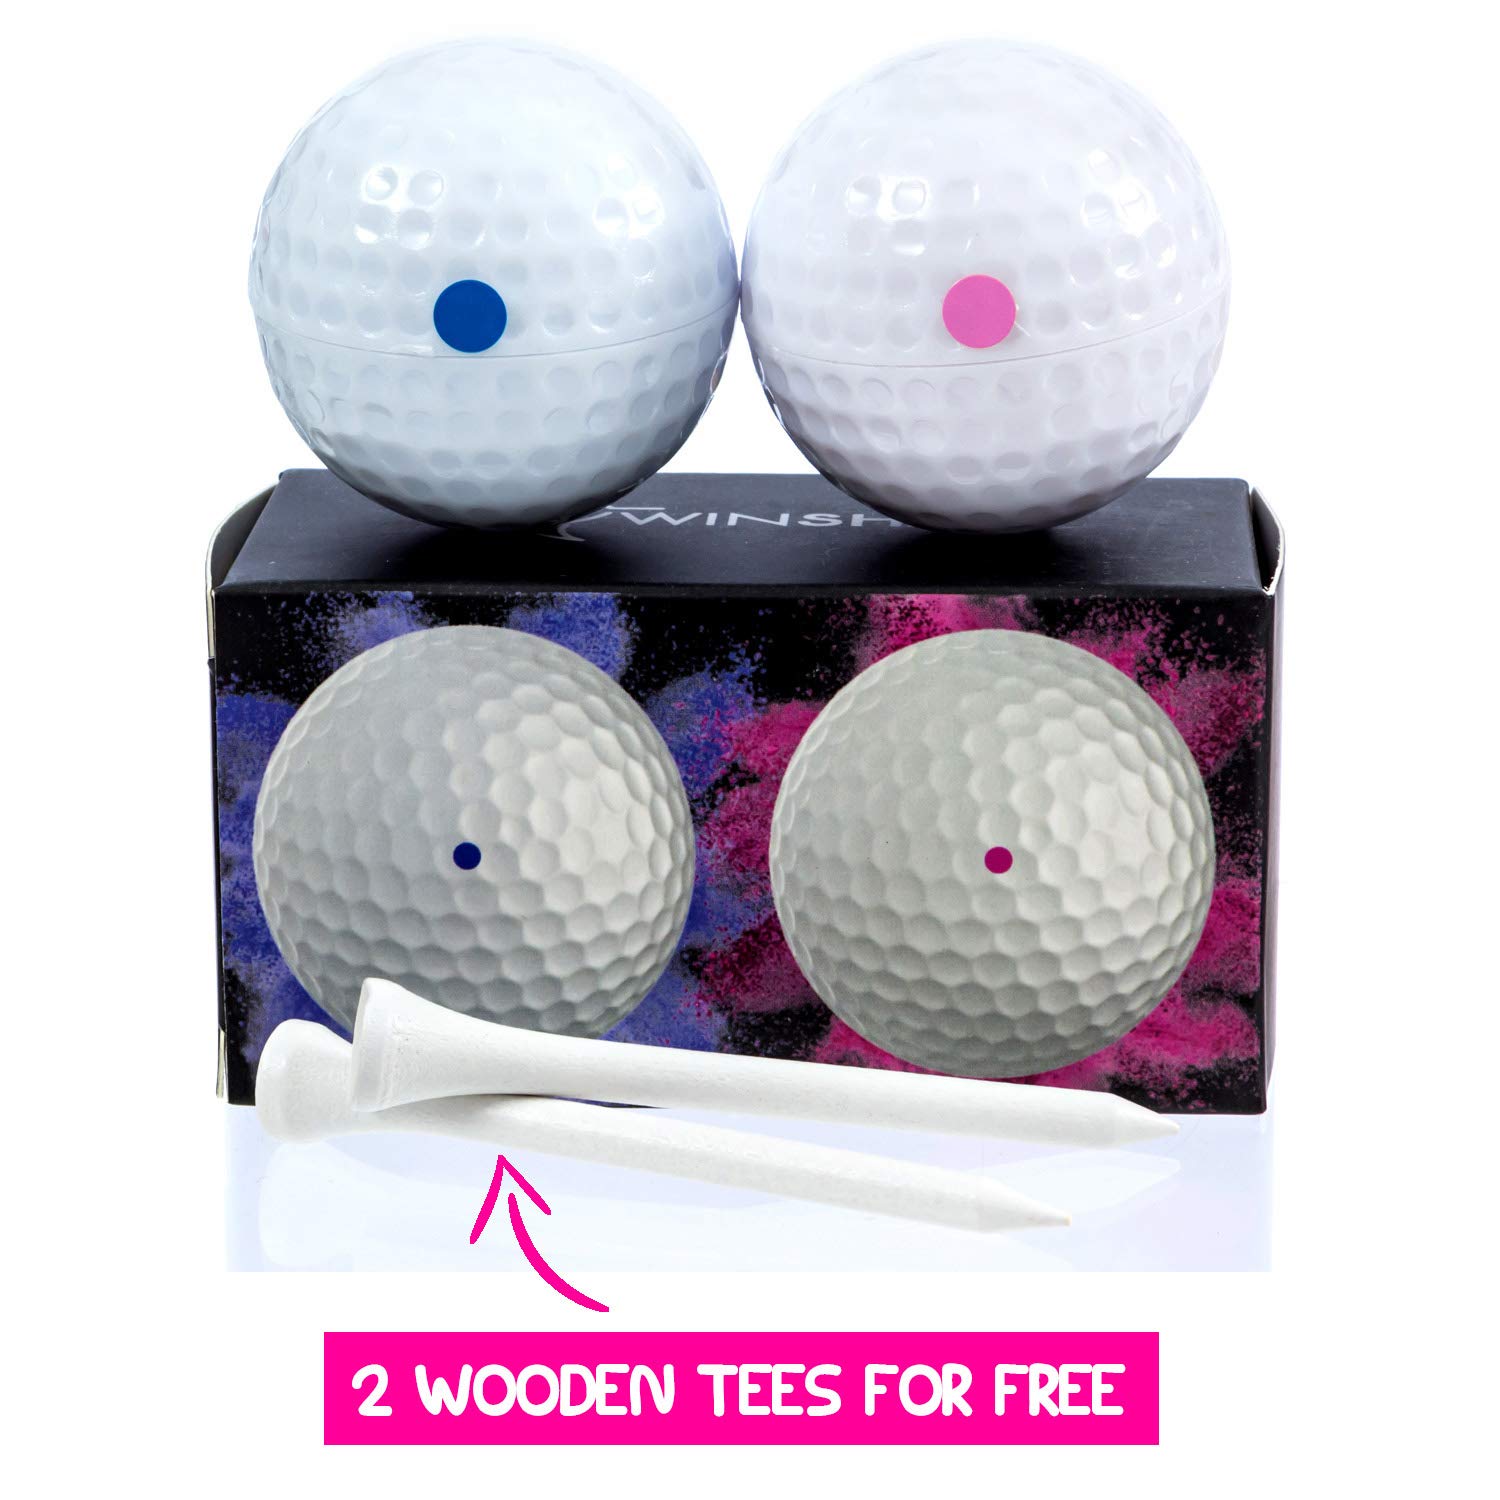 Gender Reveal Golf Balls Exploding Golf Ball Set (1 Pink + 1 Blue + 2 Wooden Tees per Pack) Girl or Boy Baby Reveal Ideas | Announcement Party Themed Gender Reveal Decorations Powder Explosion